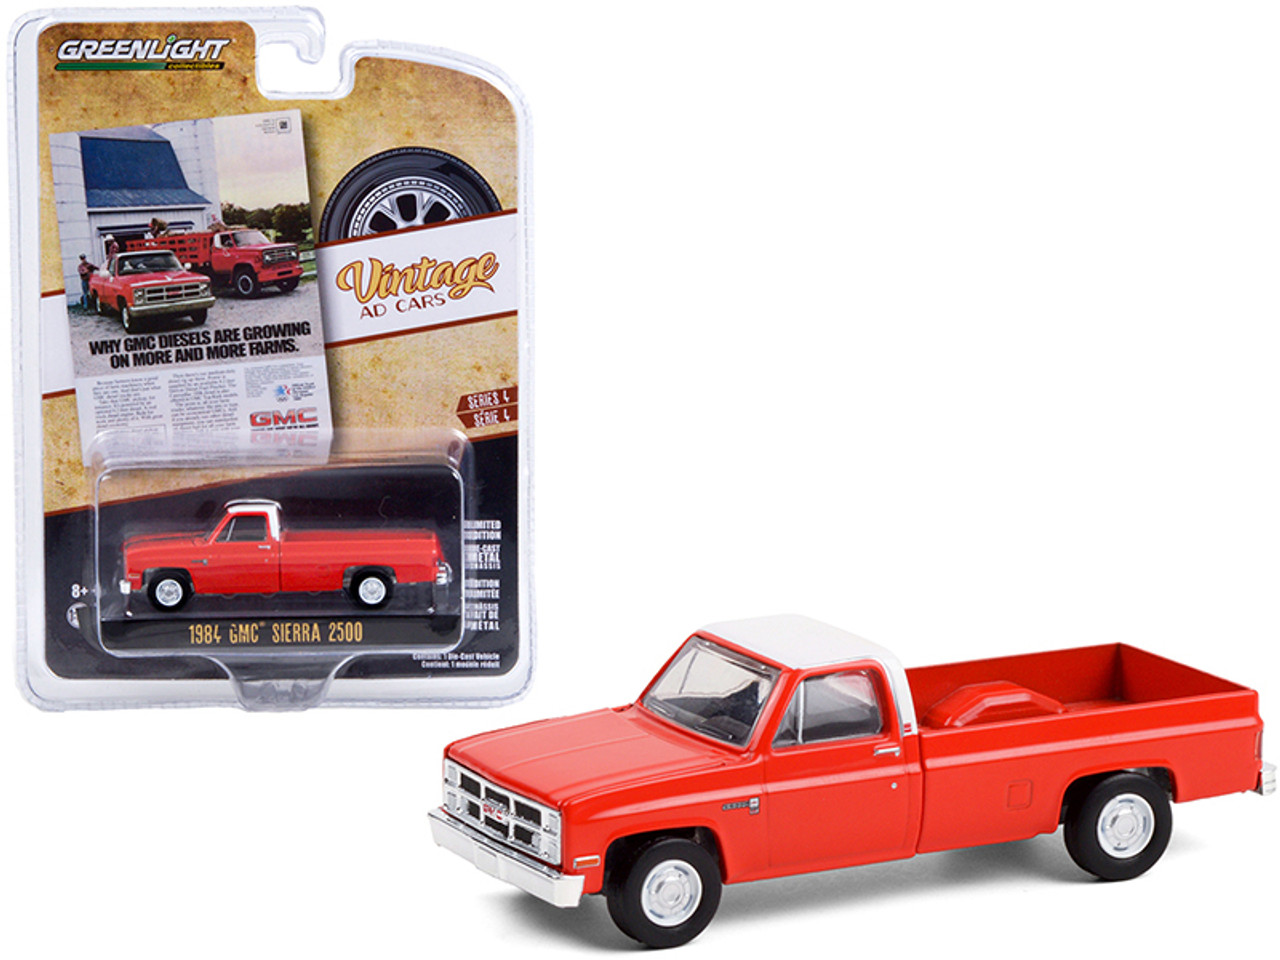 1984 GMC Sierra 2500 Pickup Truck Orange with White Top "Why GMC Diesels Are Growing On More And More Farms" "Vintage Ad Cars" Series 4 1/64 Diecast Model Car by Greenlight